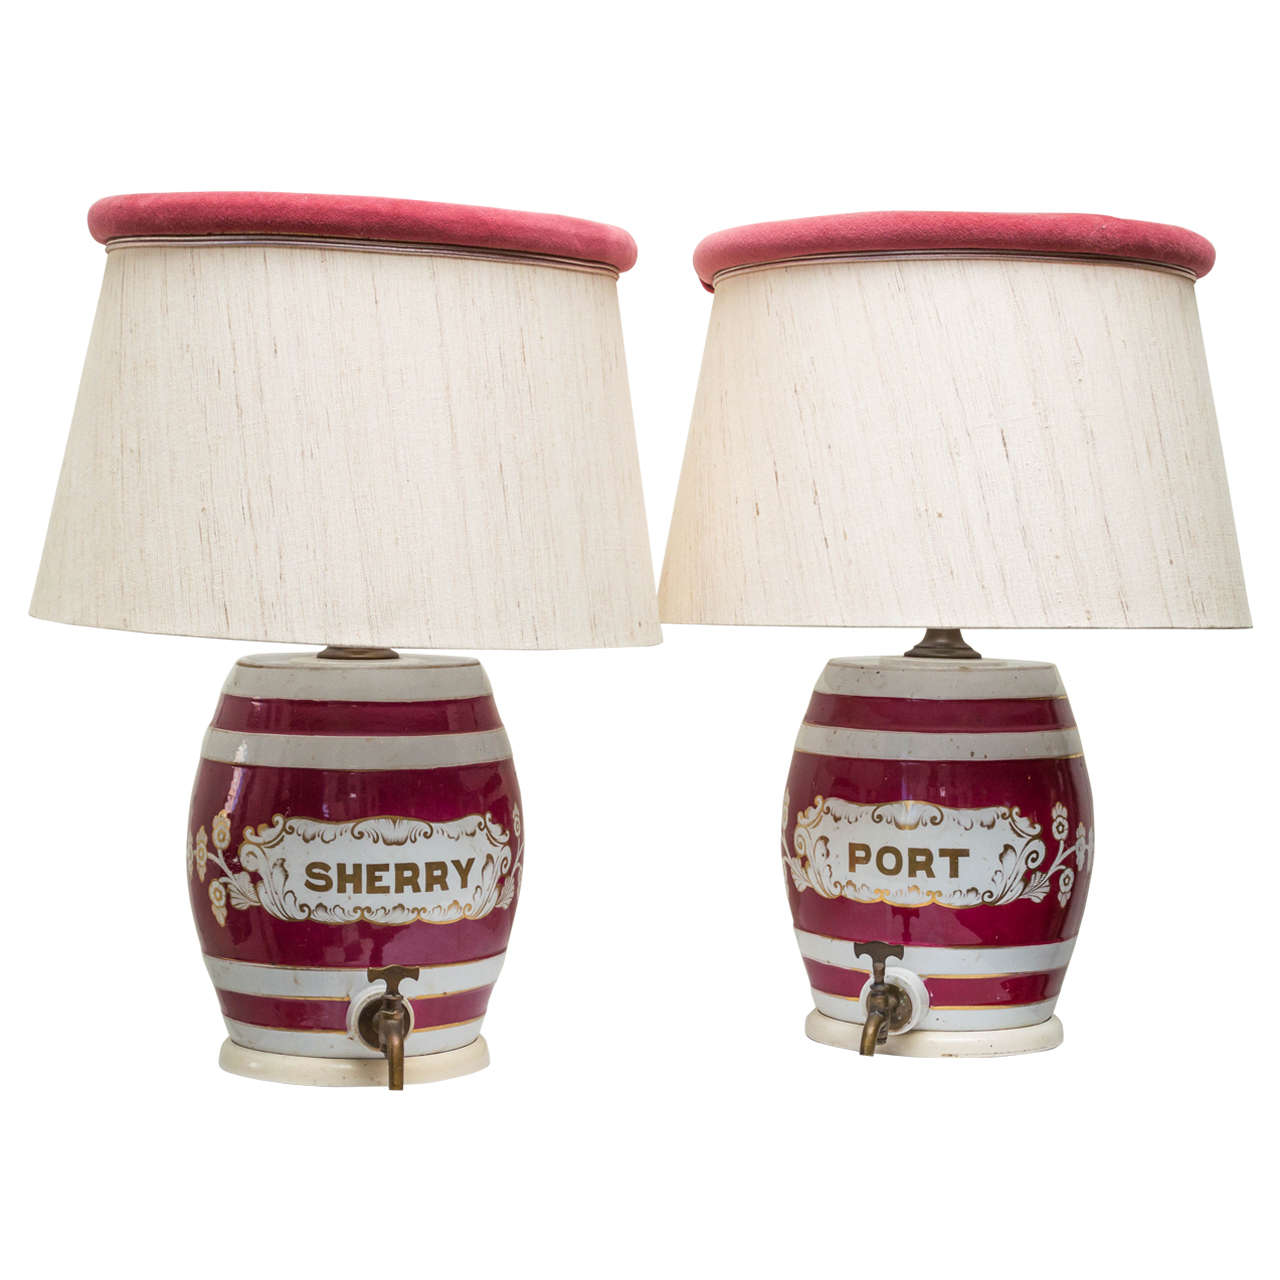 Pair of Matched Ceramic English Port and Sherry Crocks as Lamps